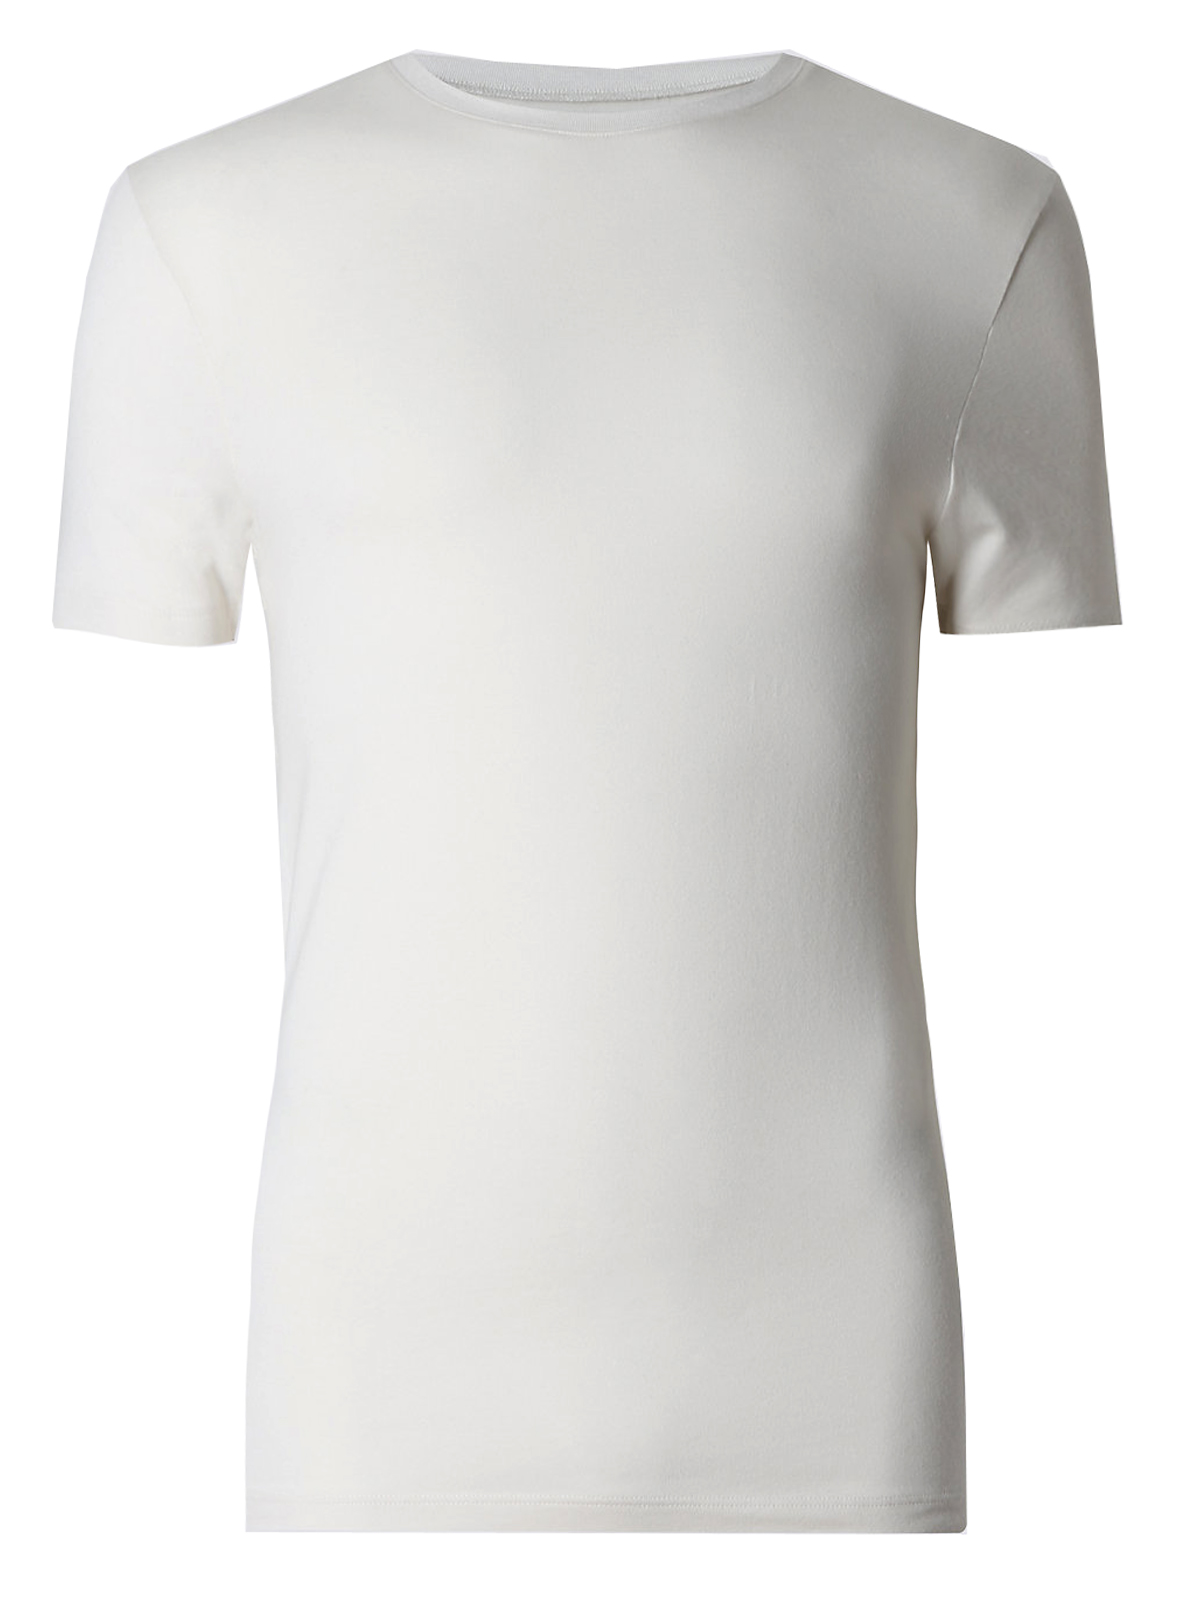 Marks and Spencer - - M&5 IVORY Heatgen Thermal Short Sleeve Top - Size ...